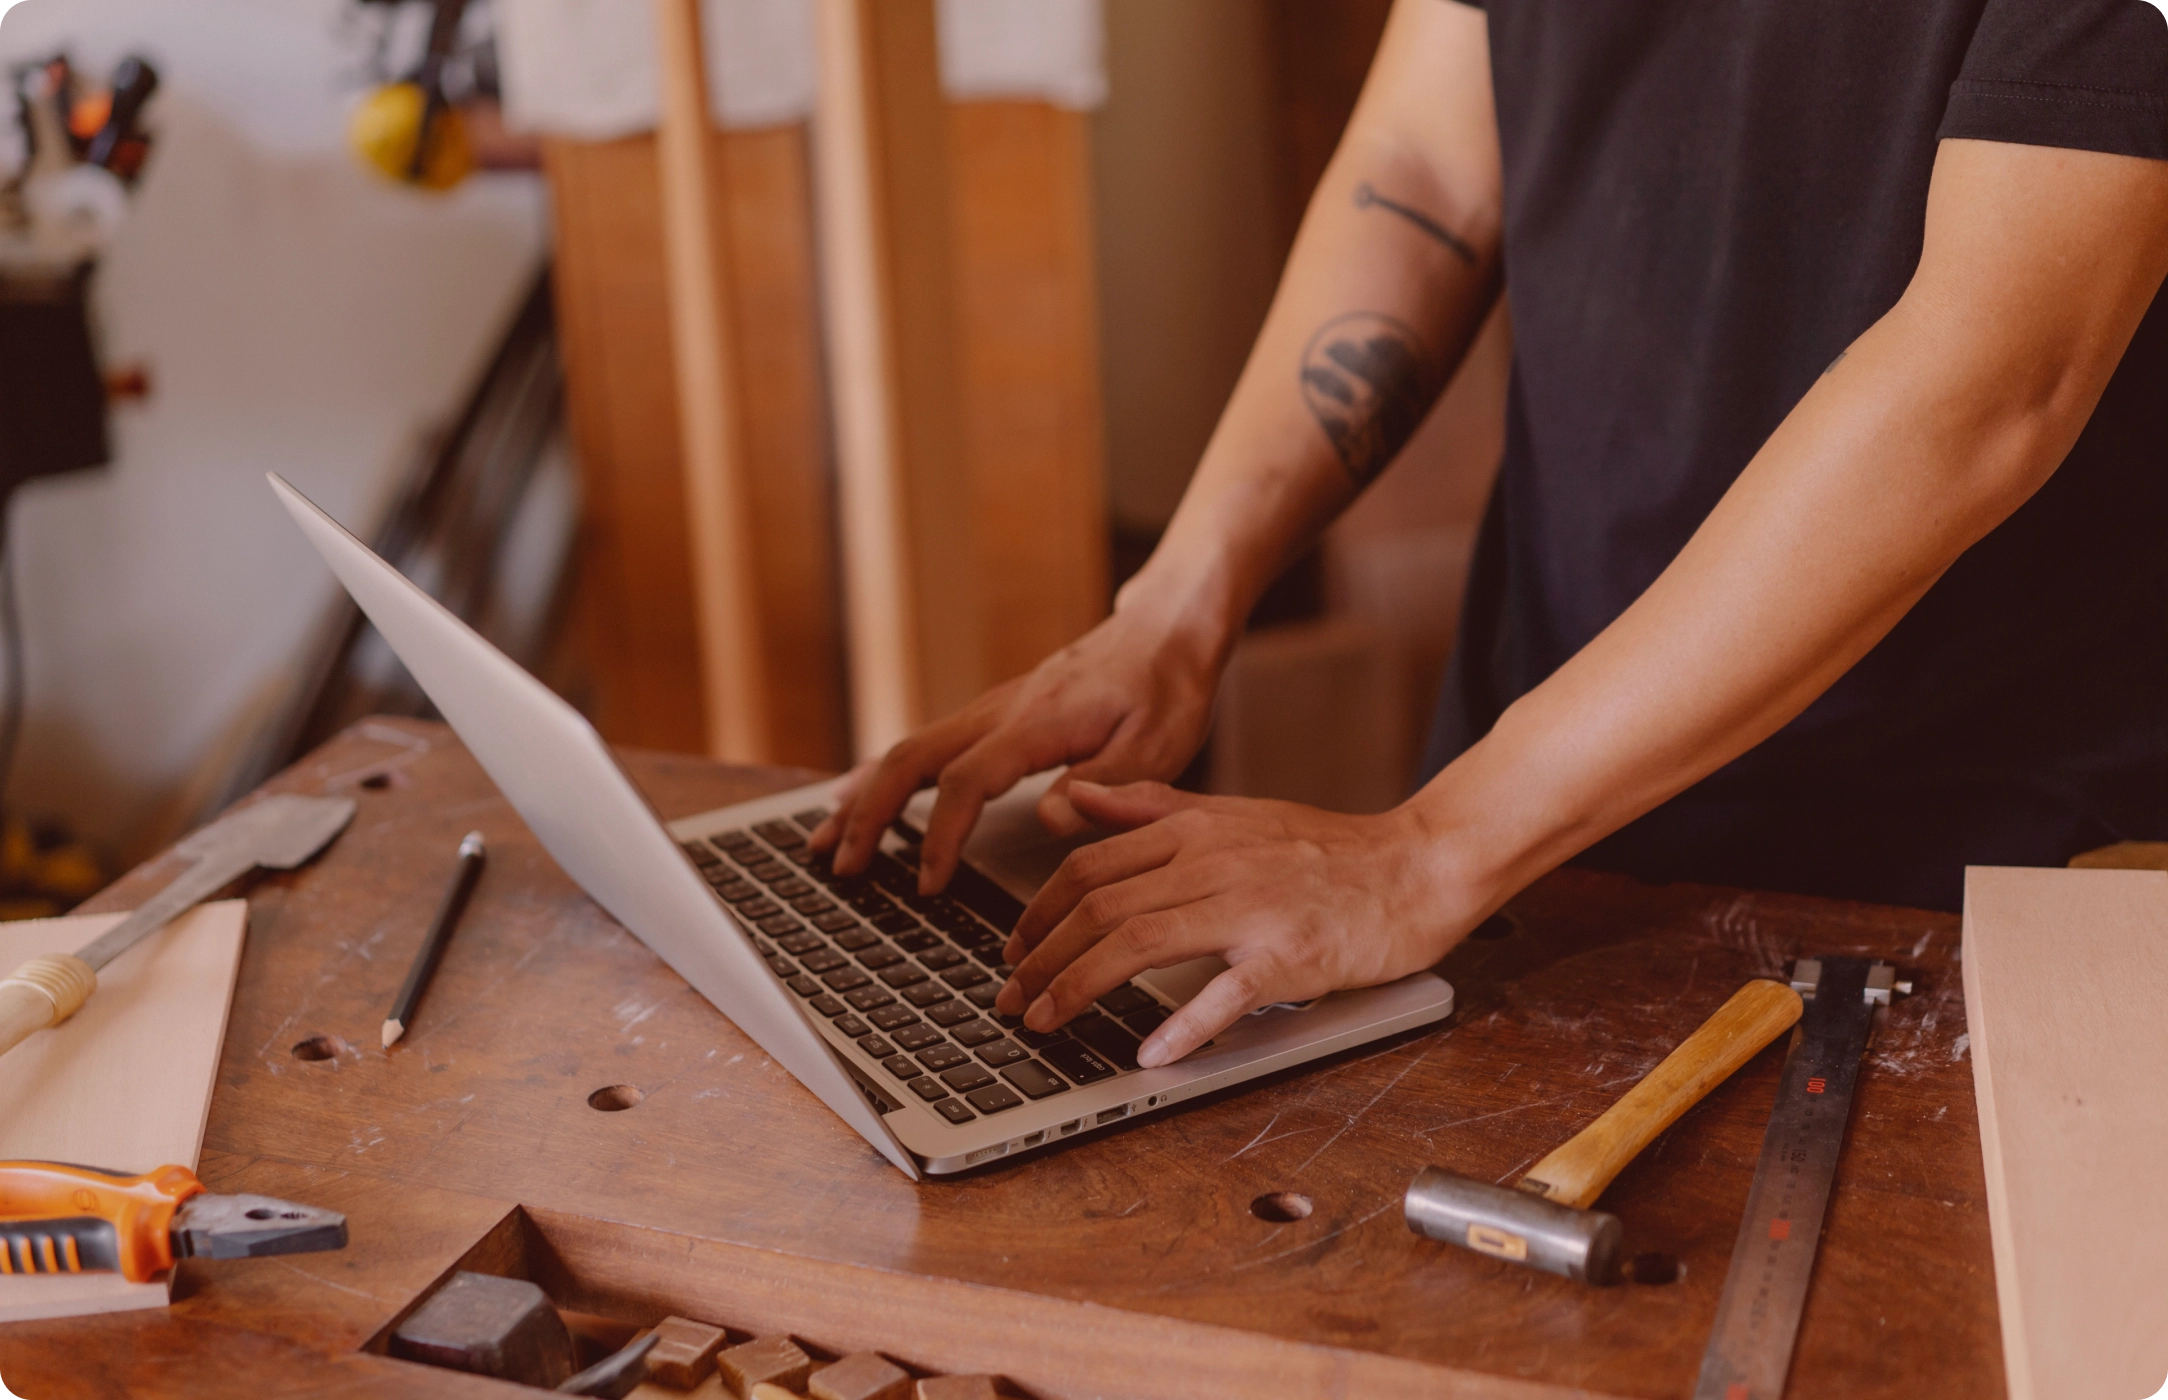 Man operating a laptop on a workbench. Tools laying next to it.